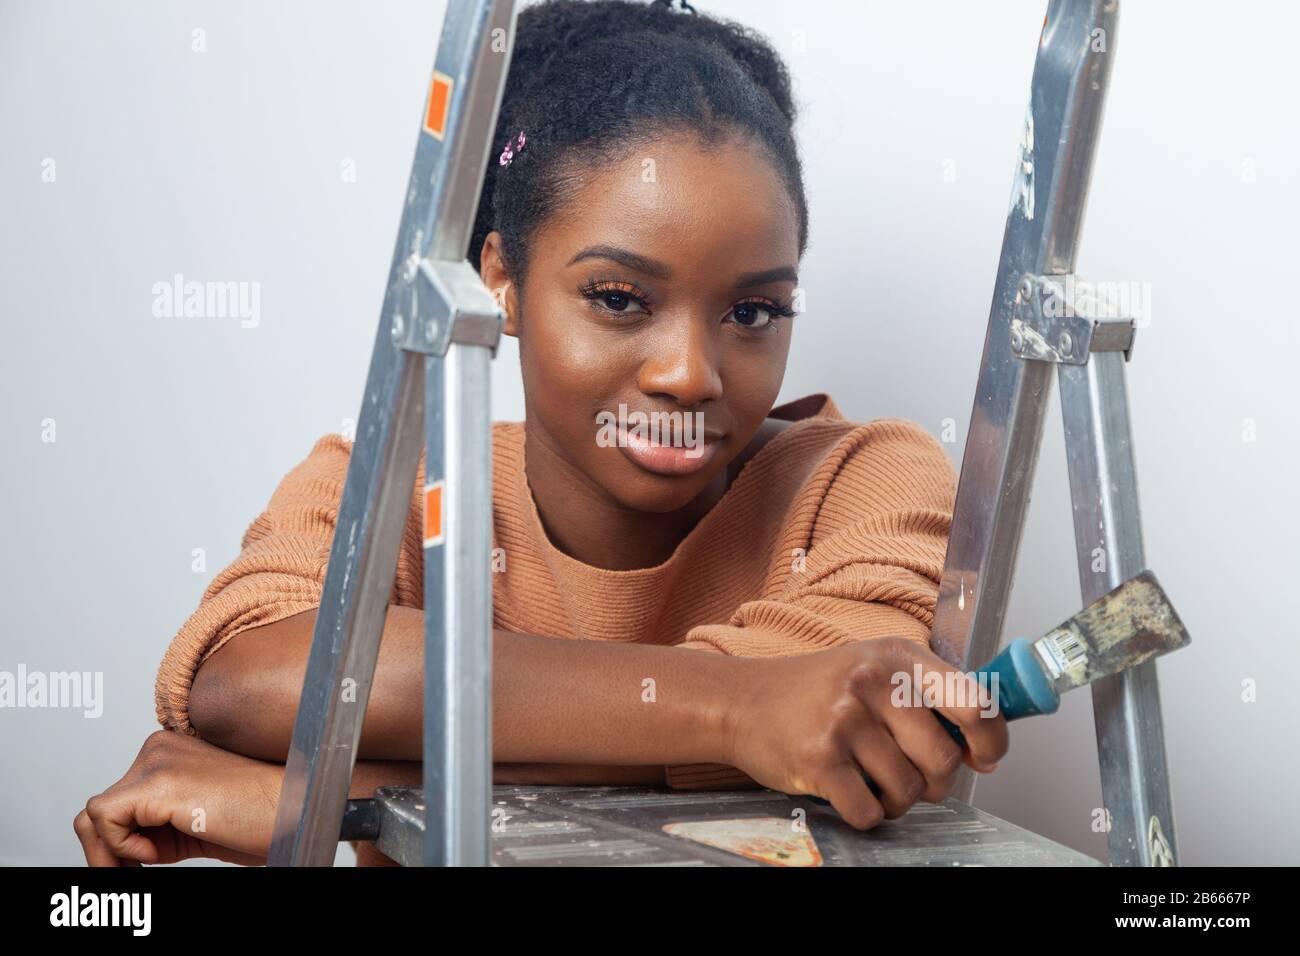 A beautiful young woman of African ethnicity resting her hands on a step ladder and holding a wallpaper scraper in her hand Stock Photo